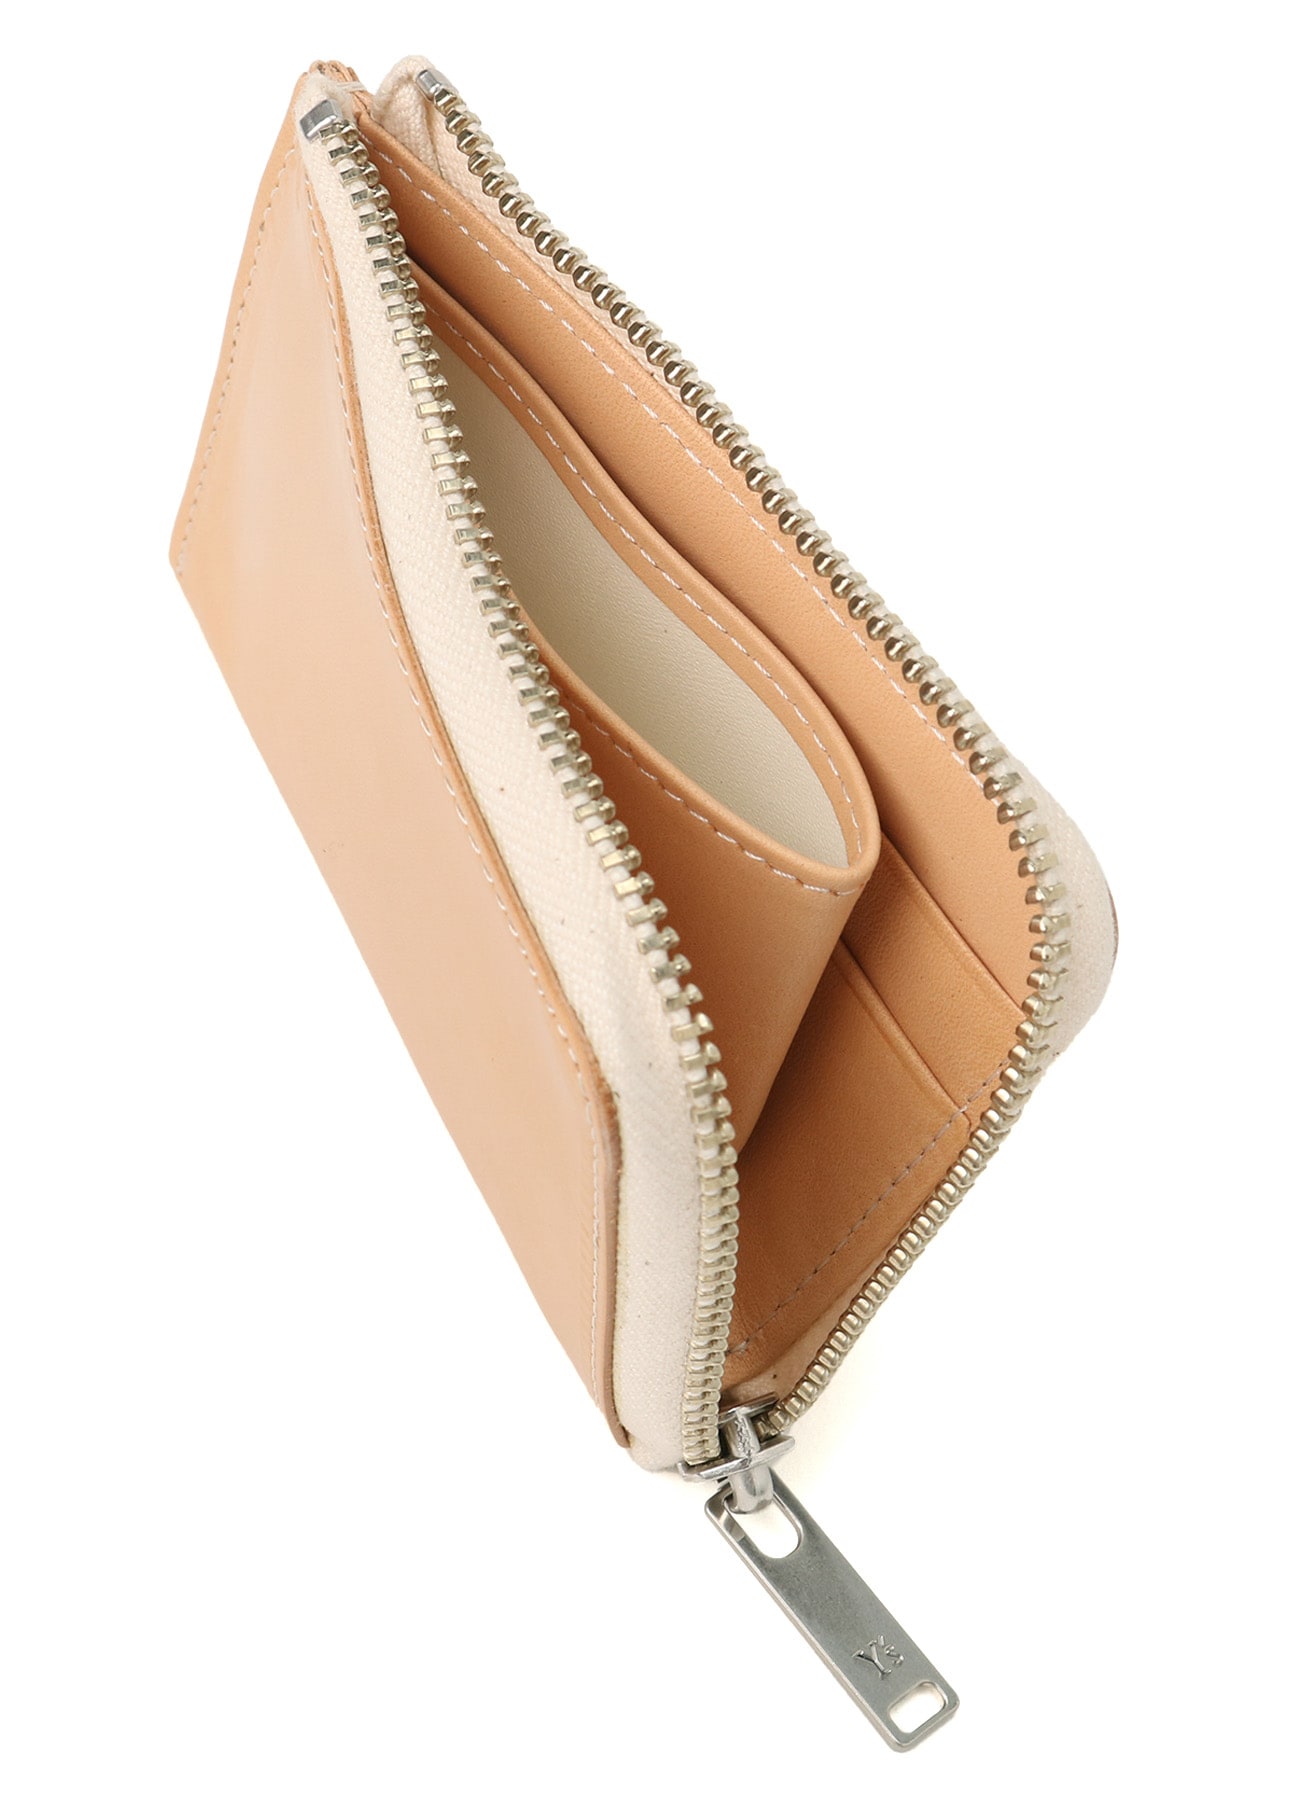 TANNED/ENAMEL-COATED LEATHER ZIPPERED CARD CASE